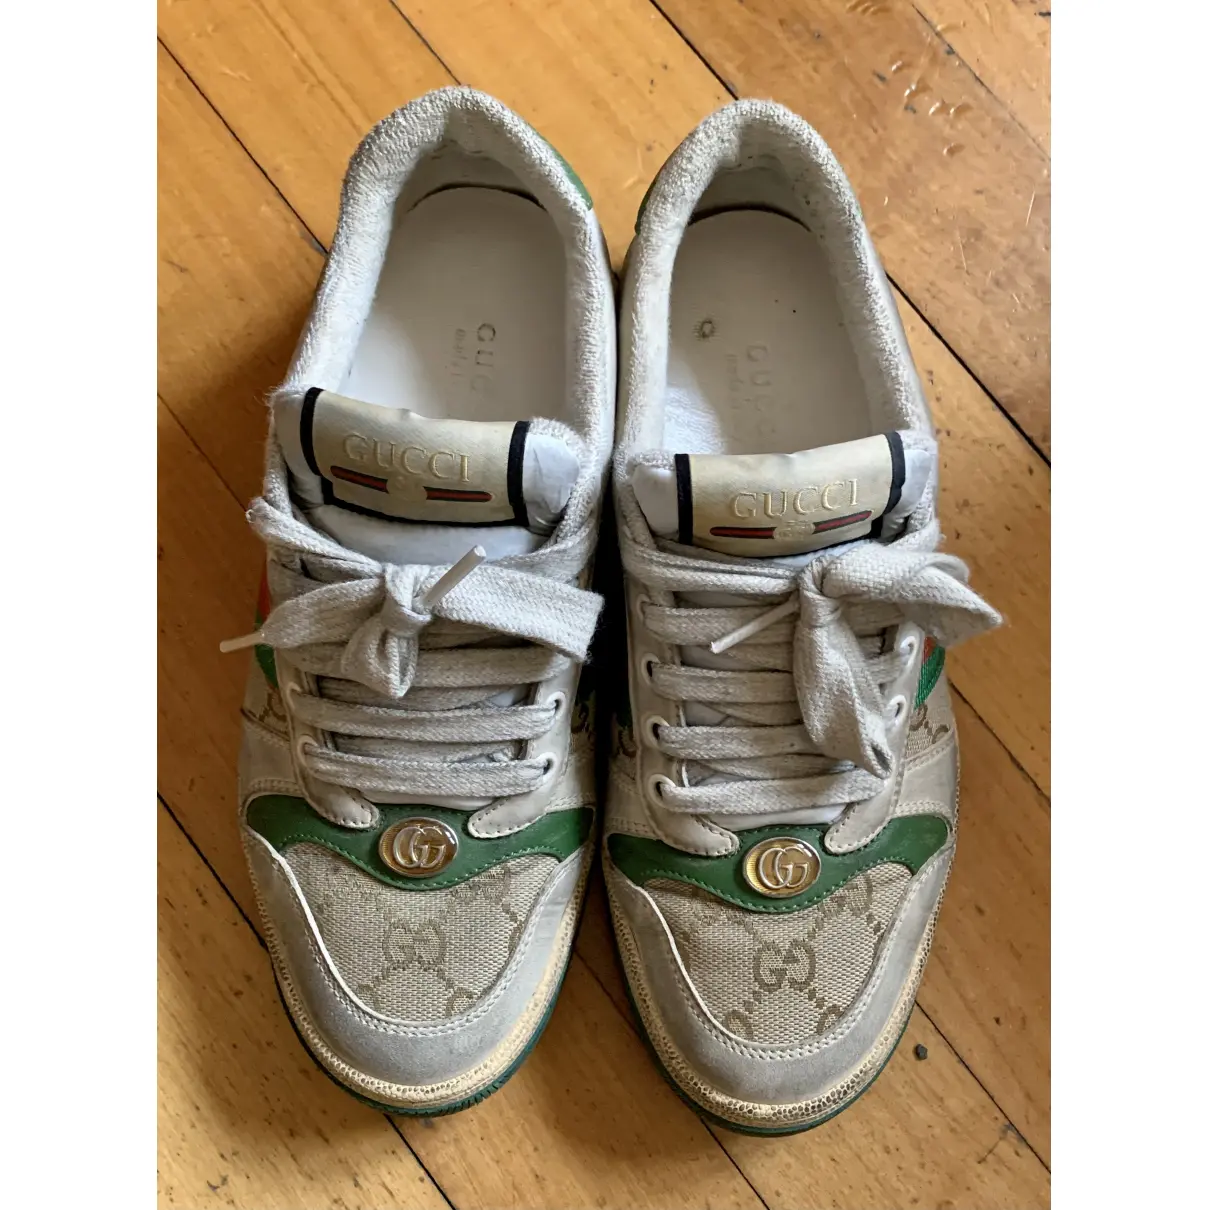 Buy Gucci Screener leather trainers online